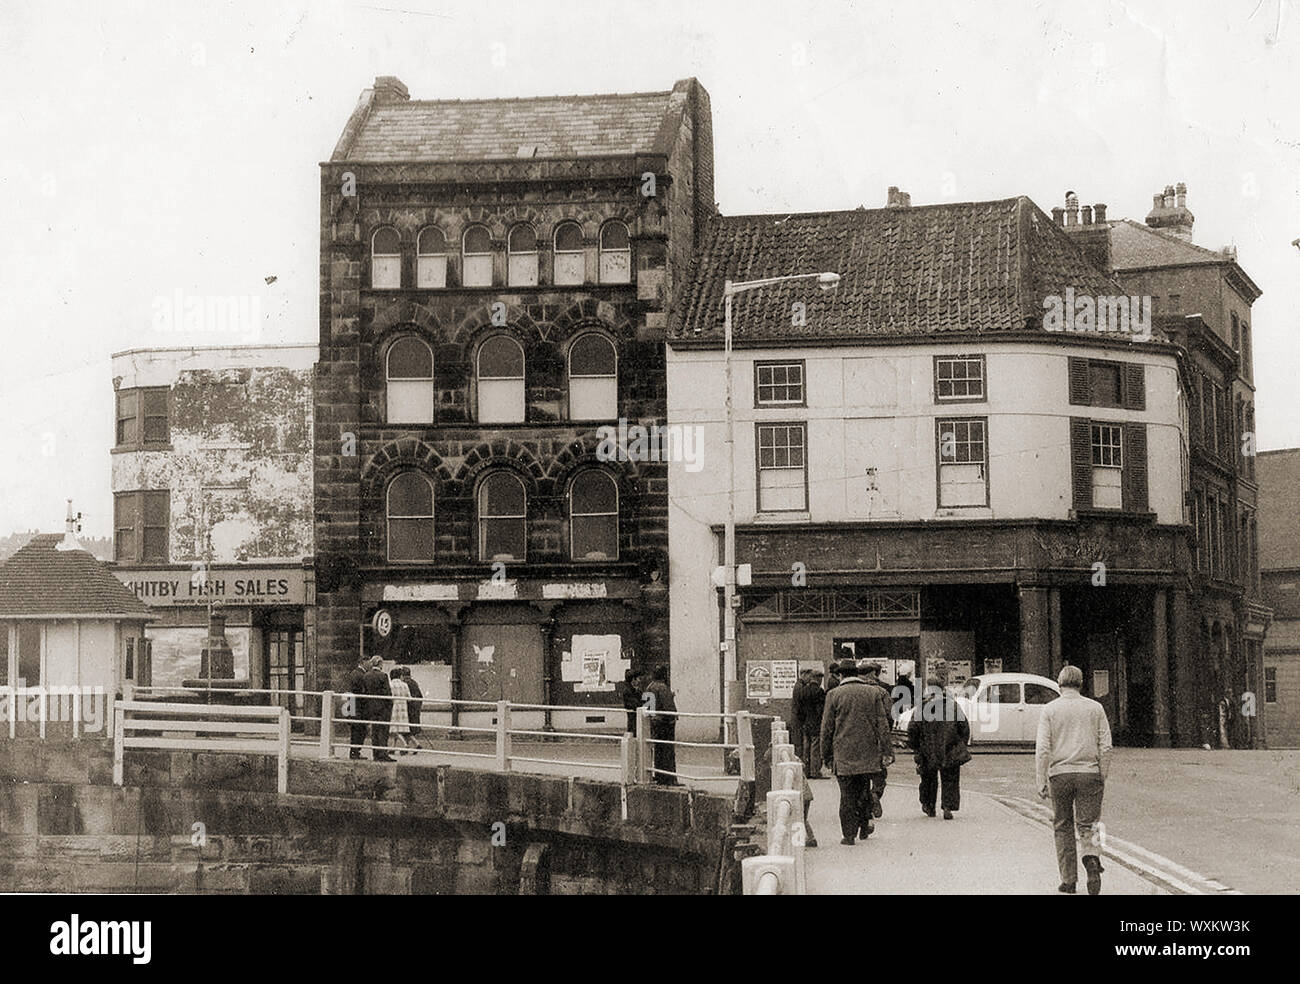 The former 'Boots Corner' block of buildings, Whitby, Yorkshire, UK. Completely demolished and not rebuilt upon  in 1975. It contained a branch of Boots the chemist  on the corner and other traders' hence the name). The small hut to the left is the bridge keepers hut, Stock Photo